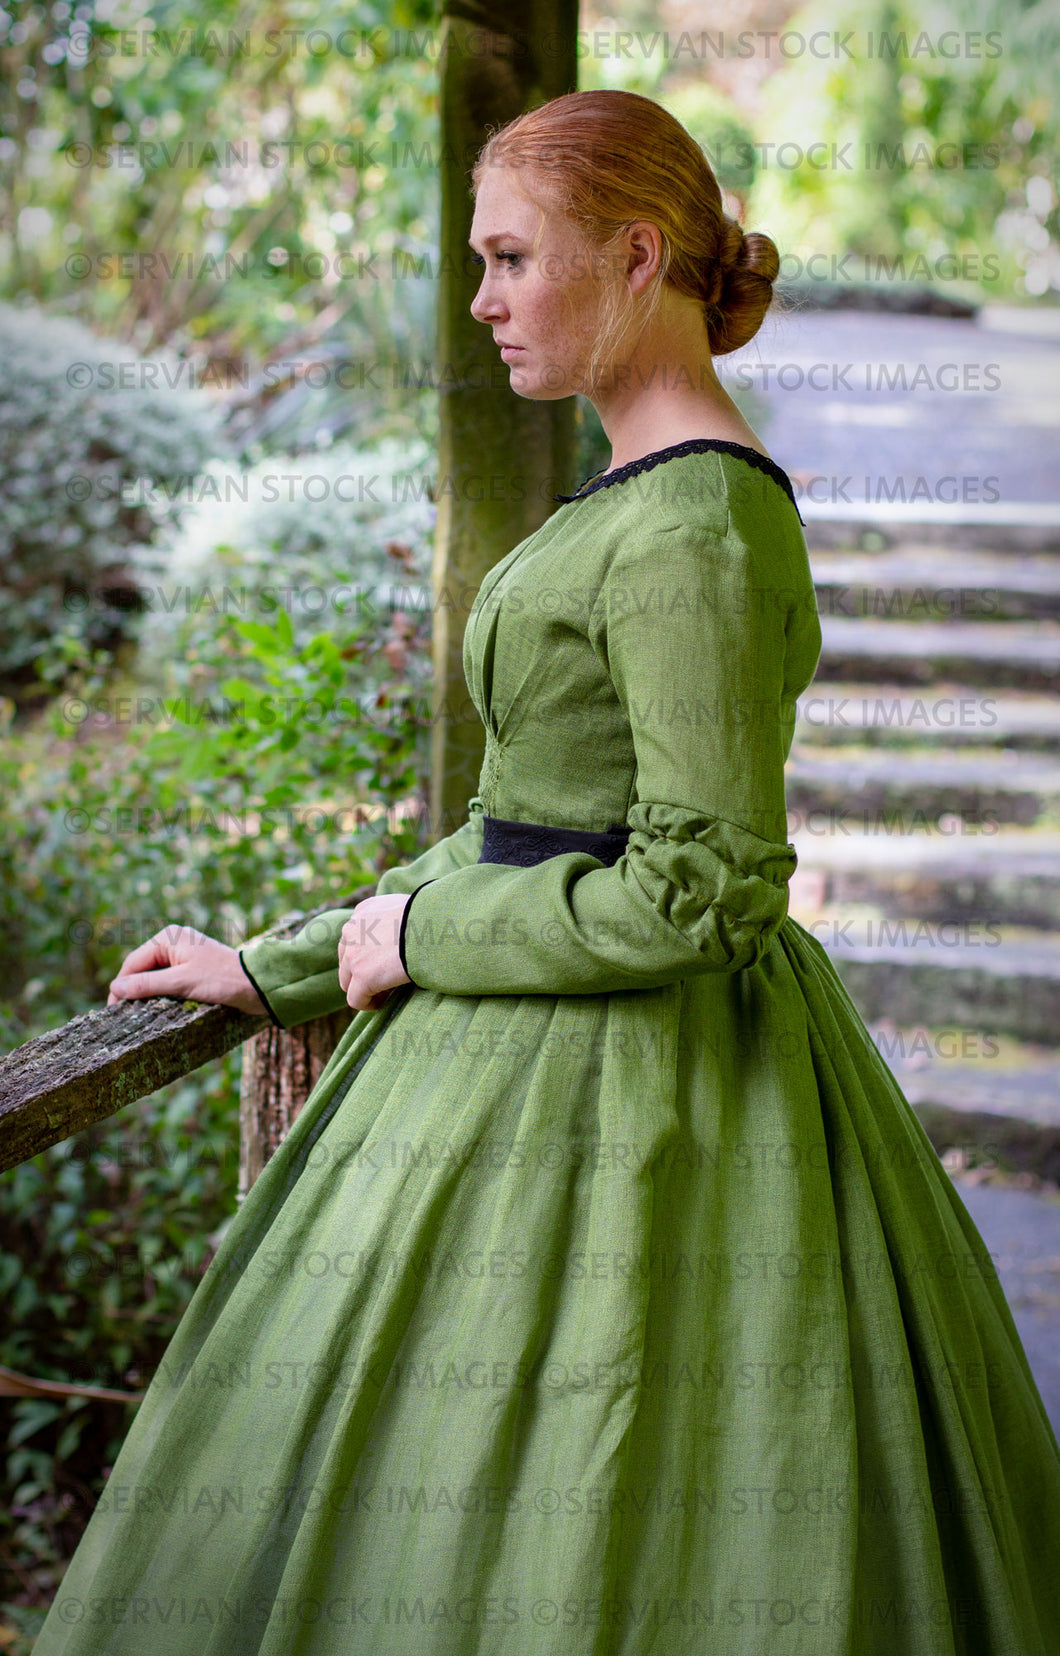 Victorian woman in a green gather front bodice and skirt  (Lauren 0092)